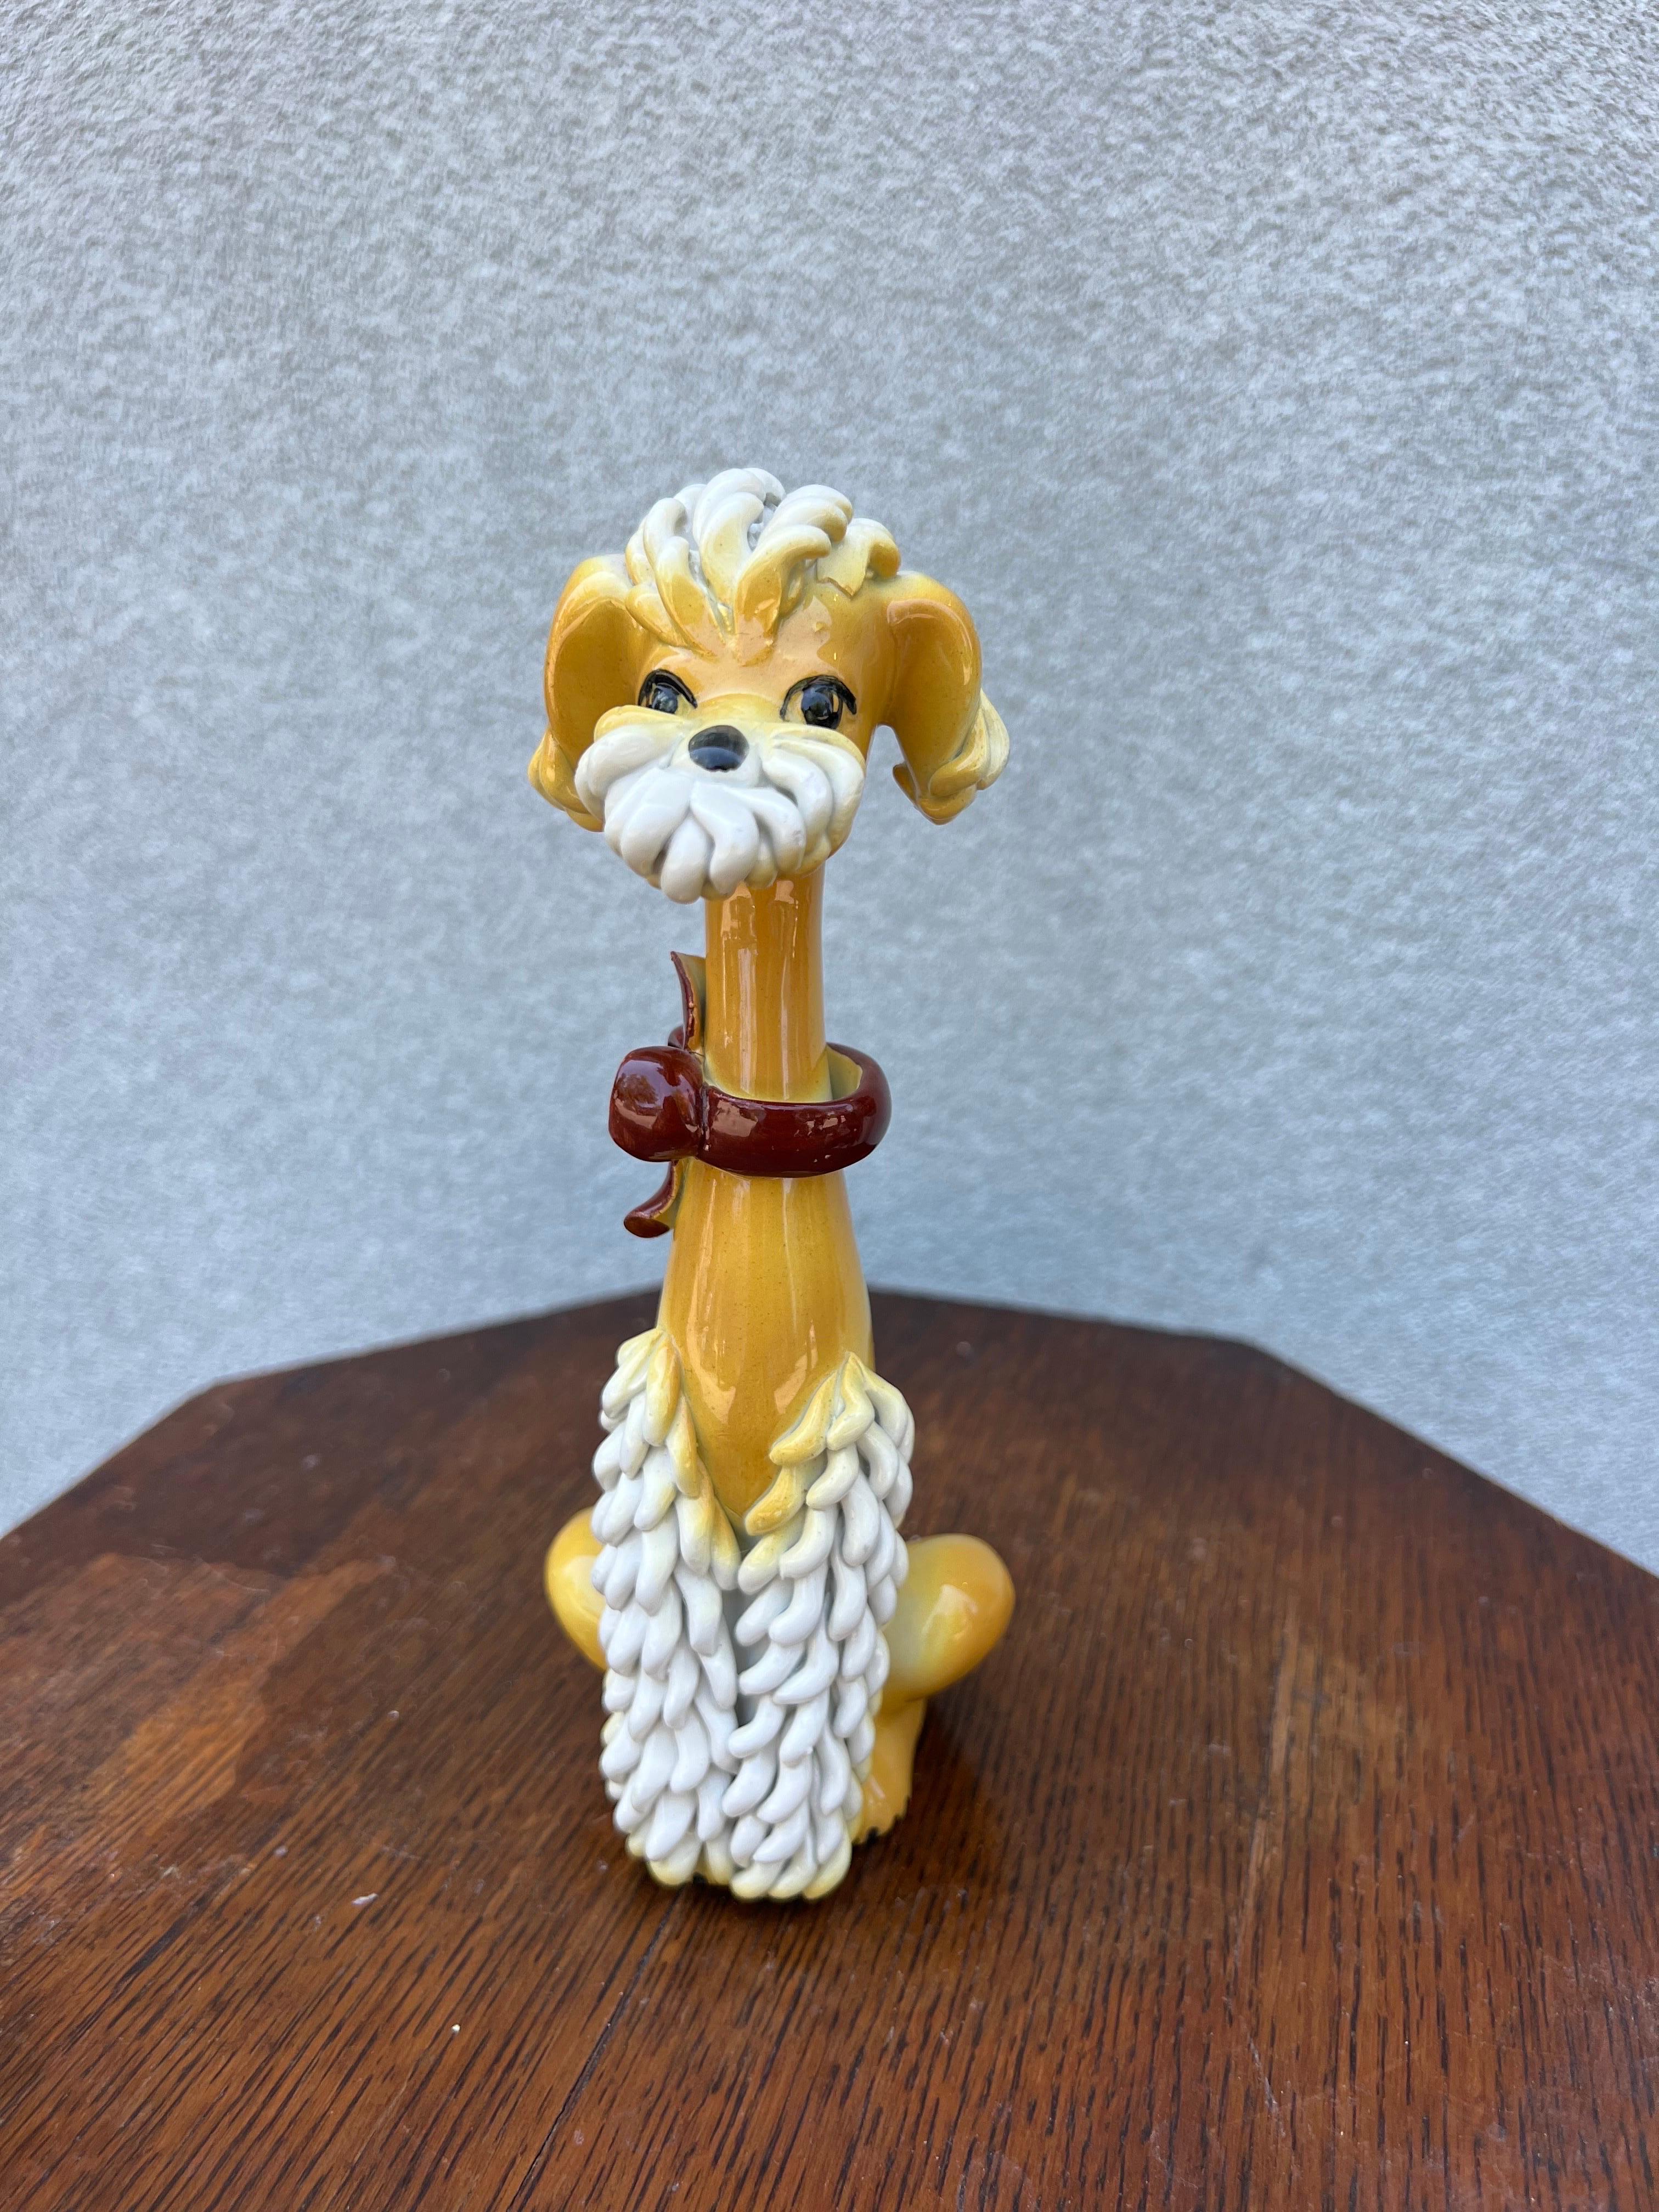 Mid Century 1960s Italian Spaghetti Poodle Dog Anthropomorphic Statue in yellow and White Ceramic.  Signed Italy
Such a whimsical piece, I love the expression on its face.